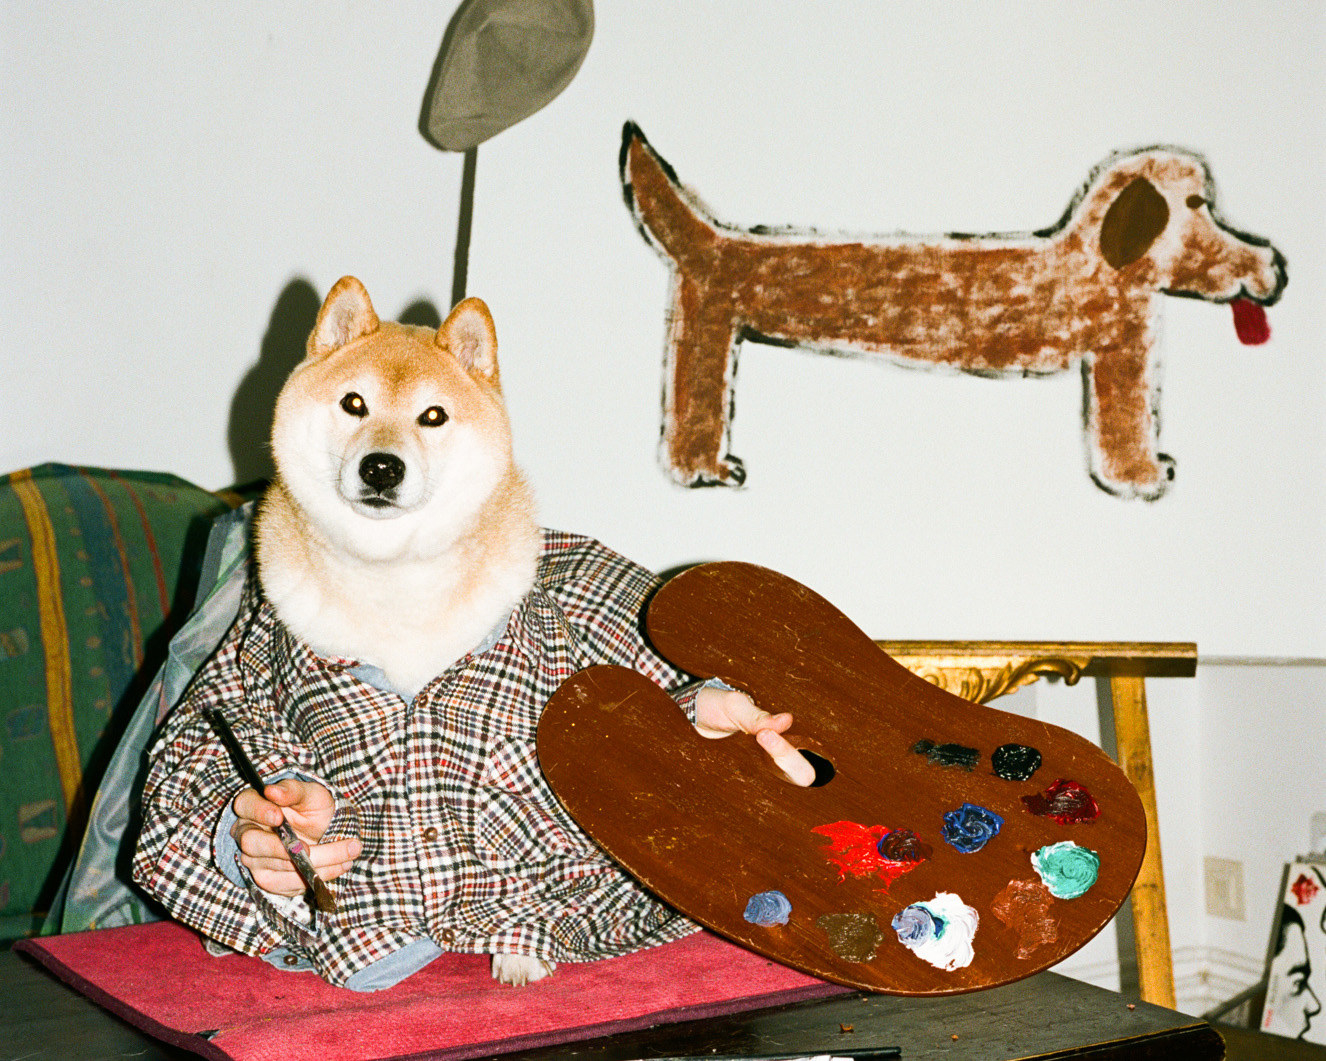 A dog seated on a chair appears to be holding a paint palette and a brush